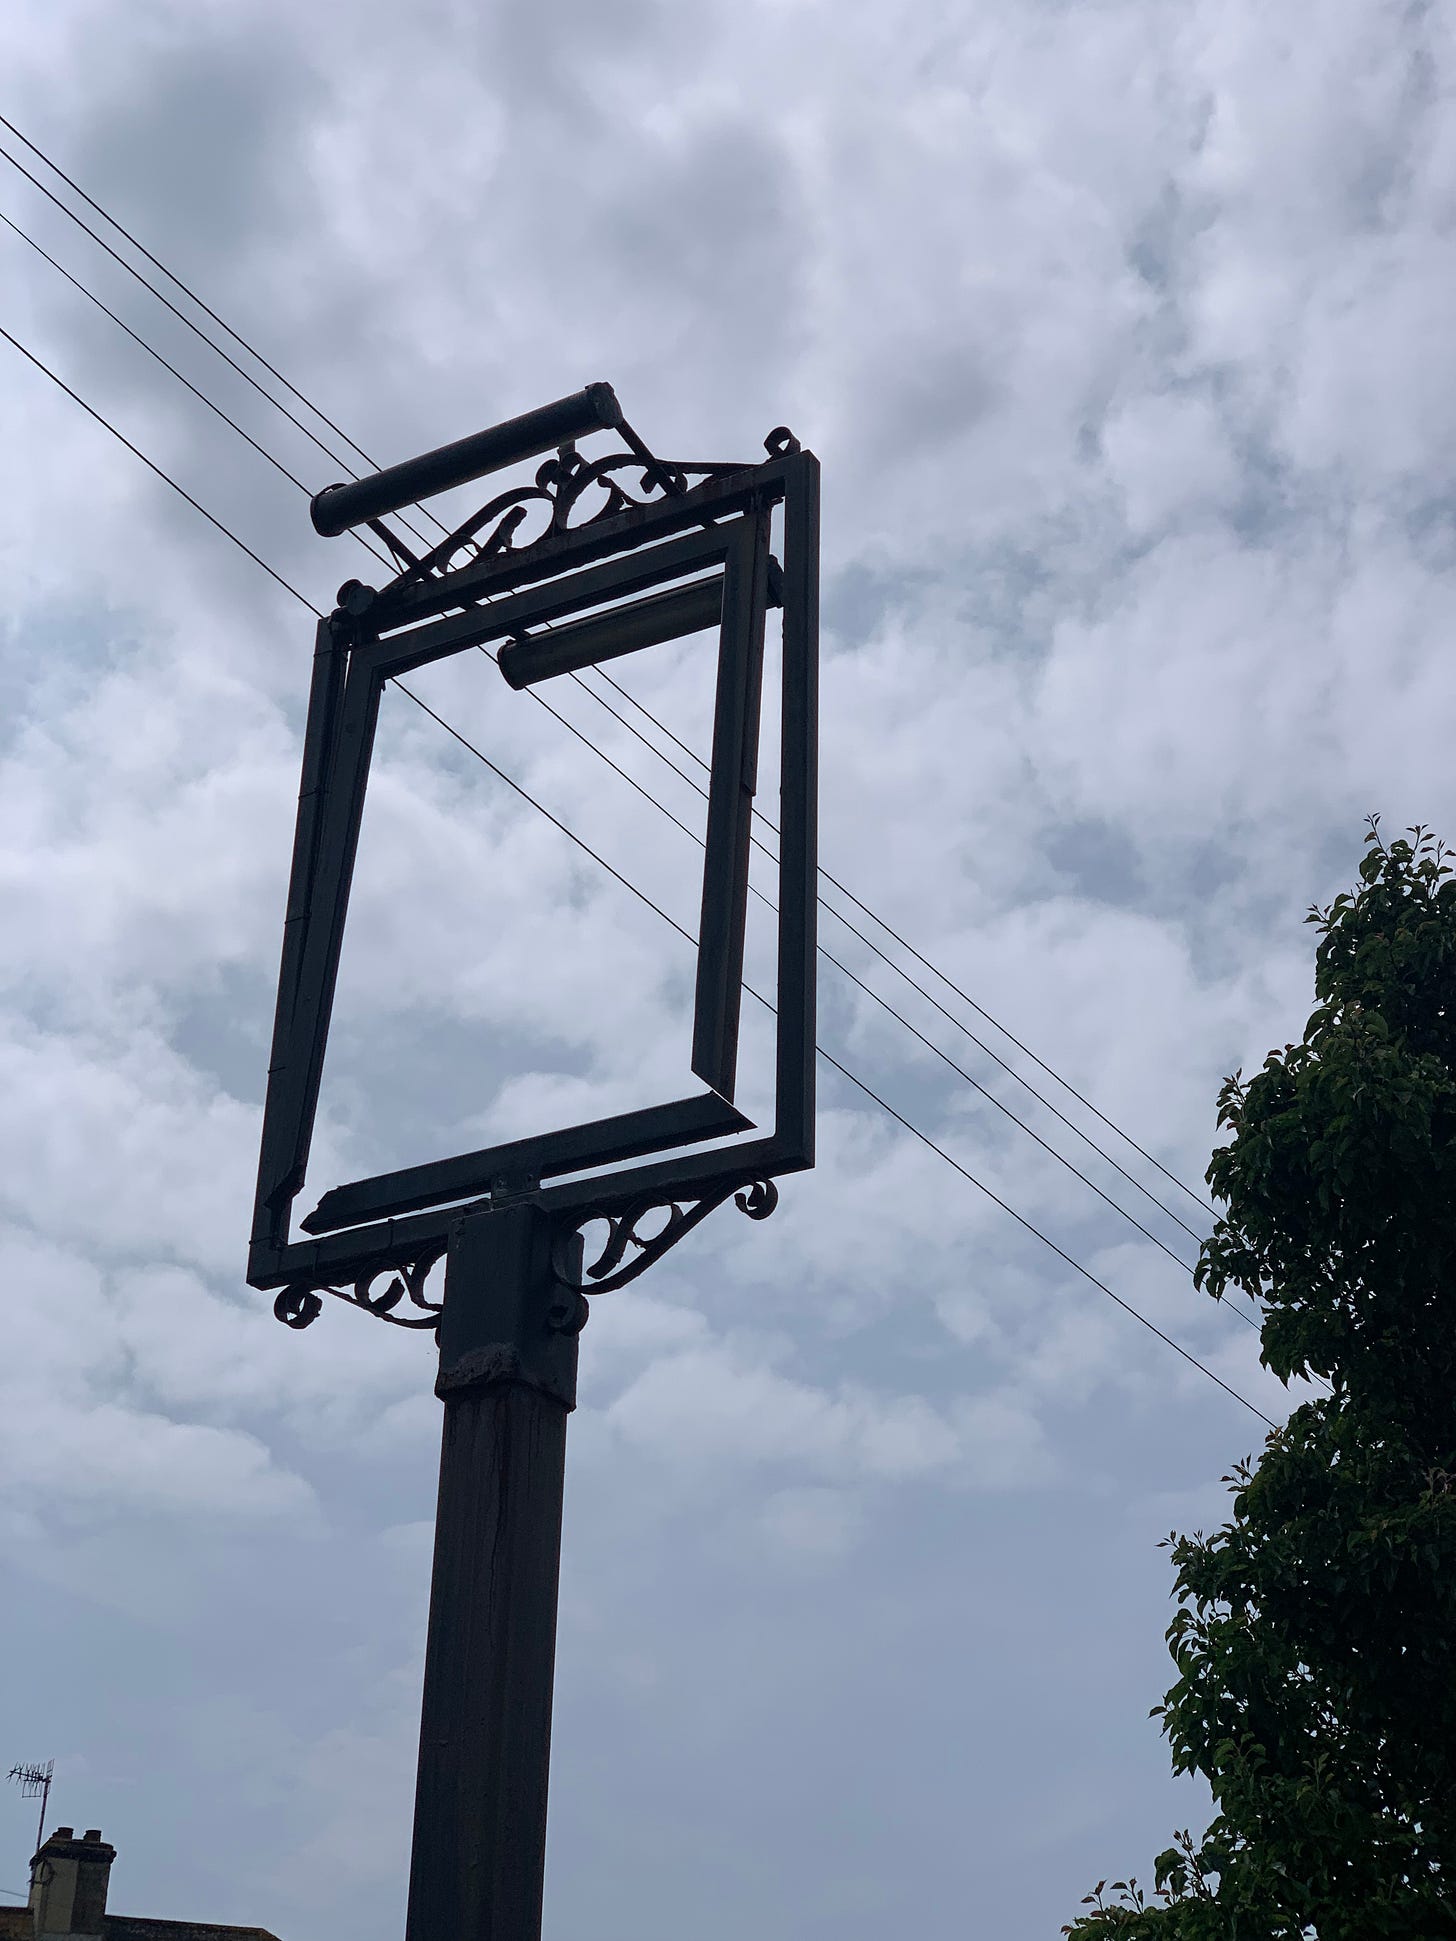 A photo of an empty wrought-iron sign frame against a cloudy sky with power lines running behind it 